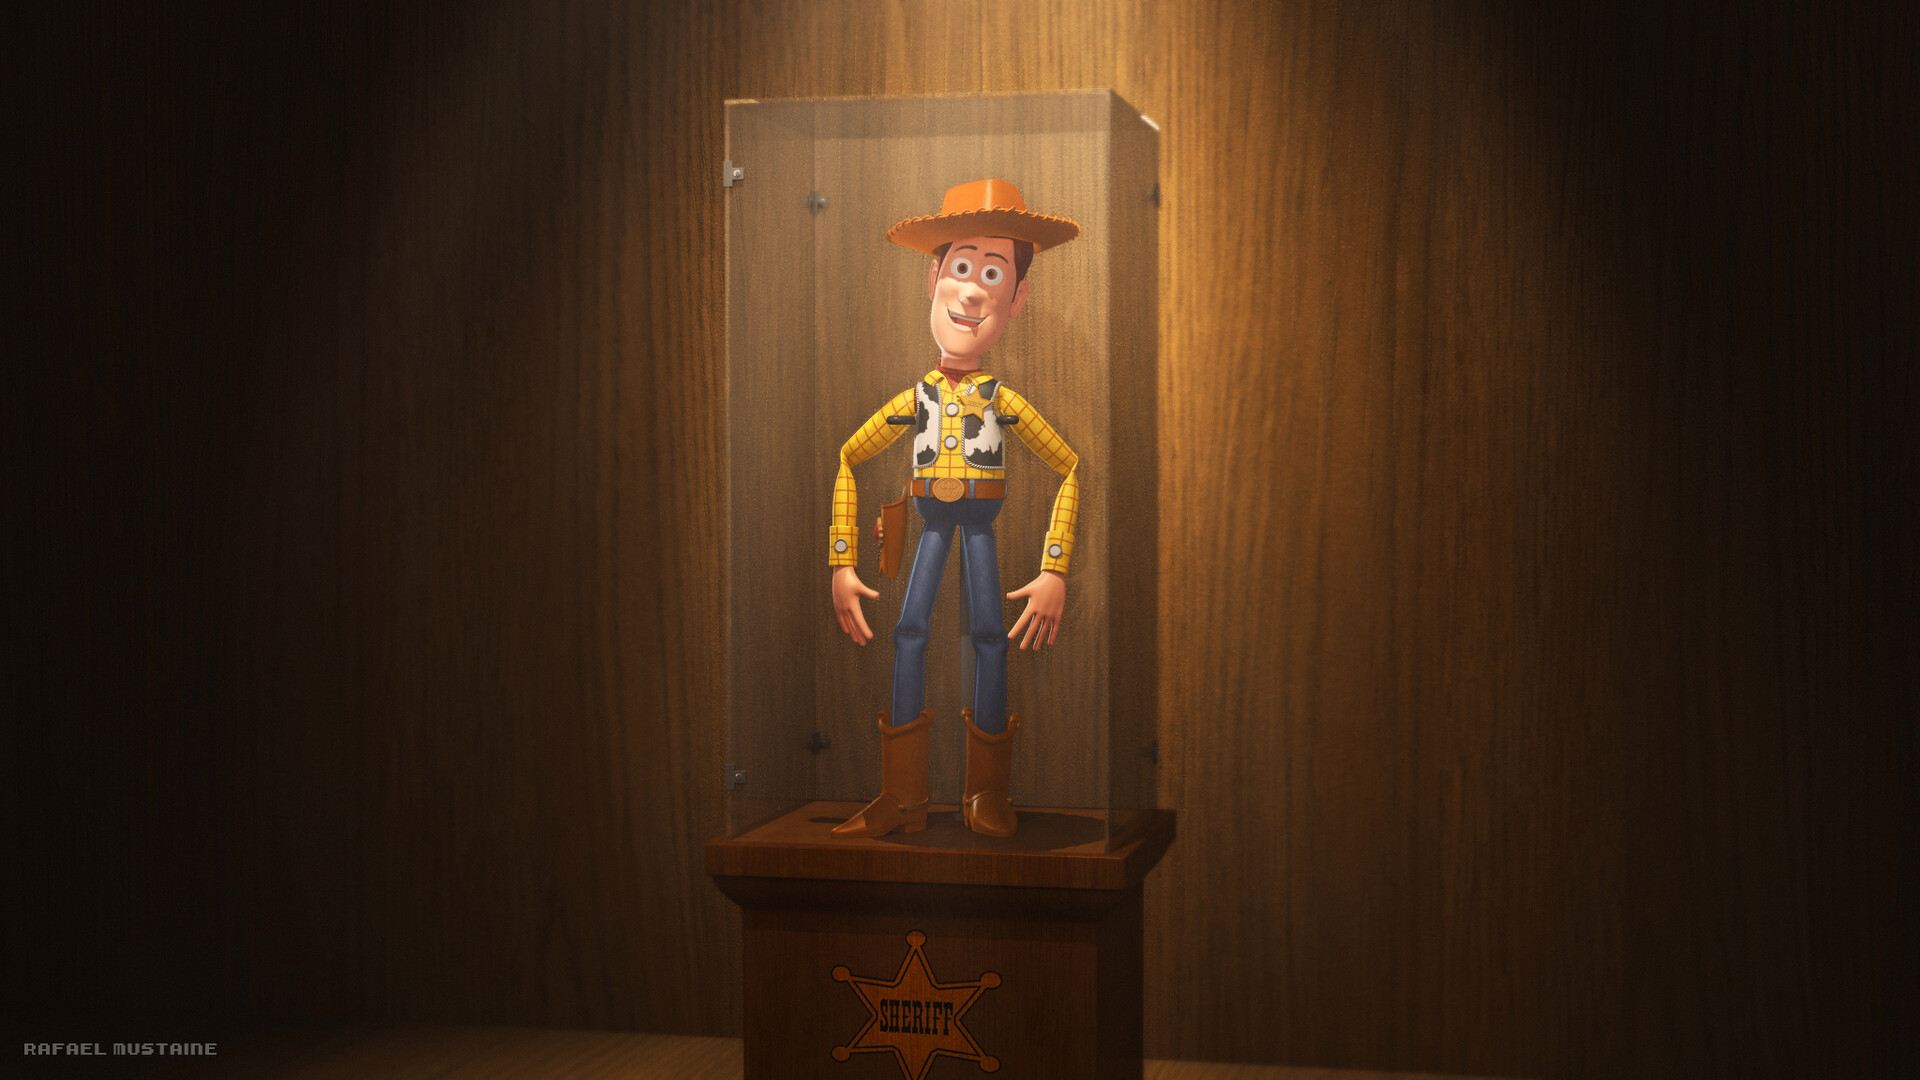 Sheriff Woody Toy Story Fan art - Finished Projects - Blender Artists  Community